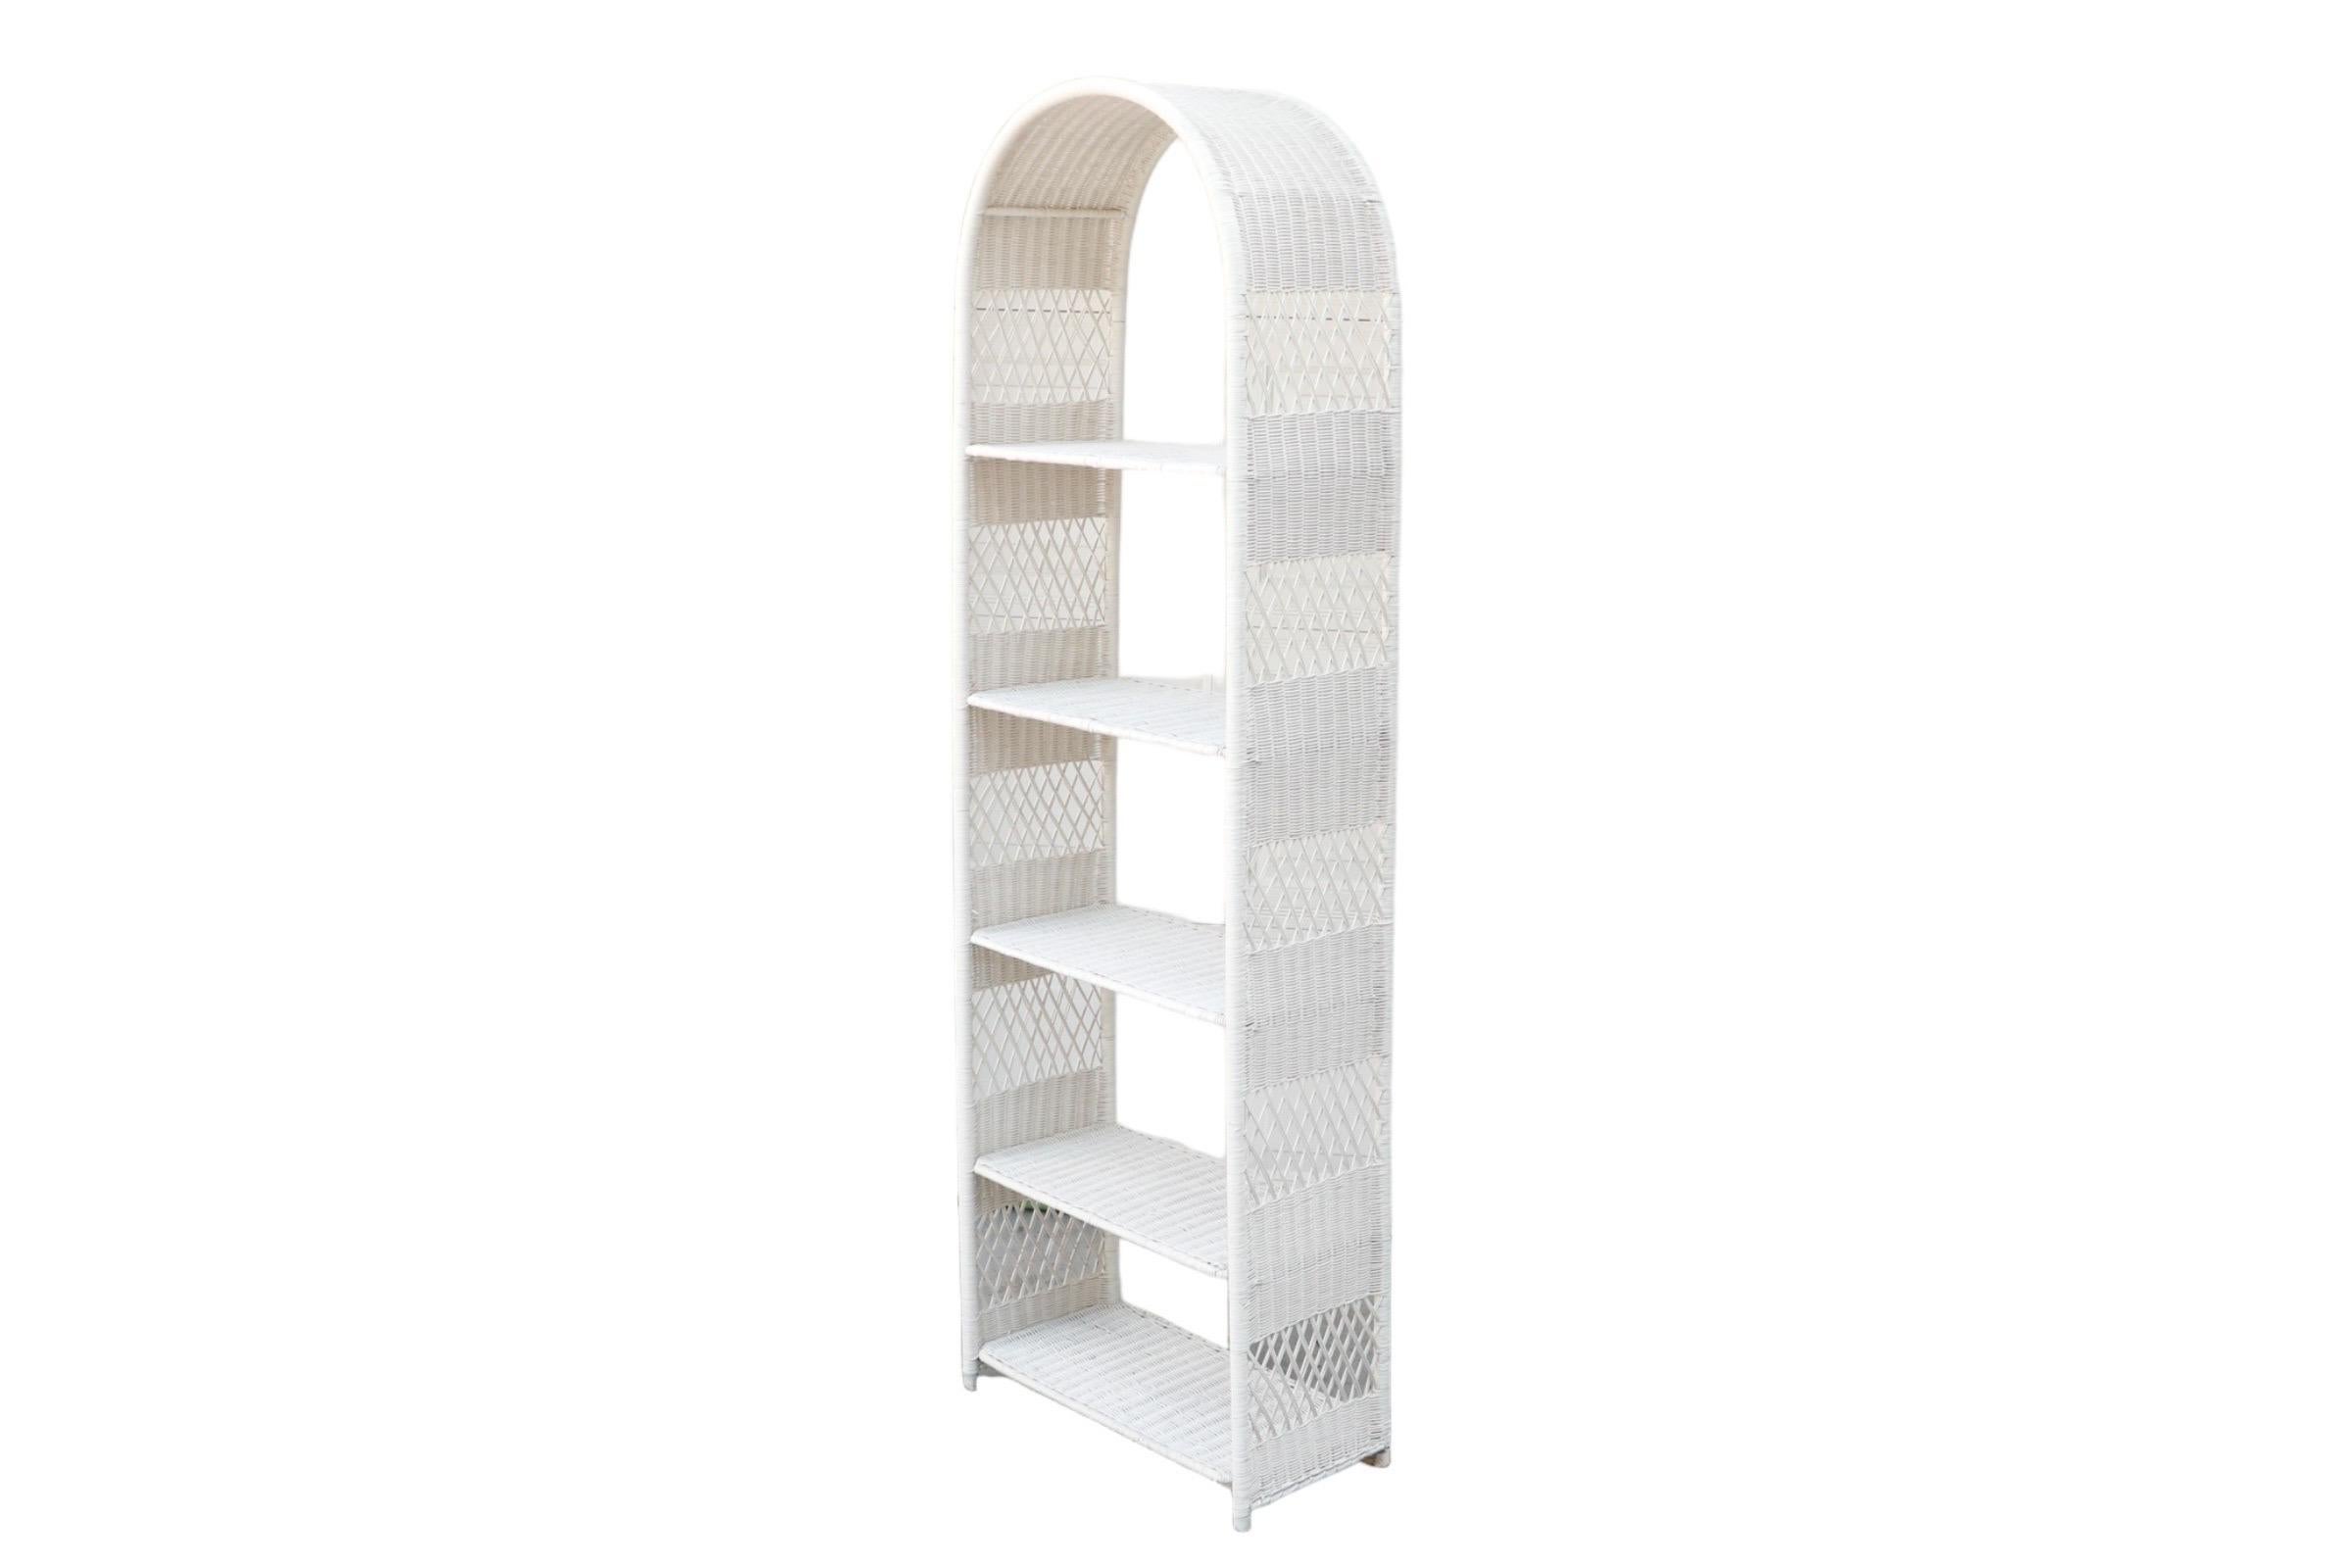 An open wicker etagere or bookcase in white, made of woven rattan. Five rattan shelves are set in an arched frame, with woven rattan and braided lattice panels at each side.